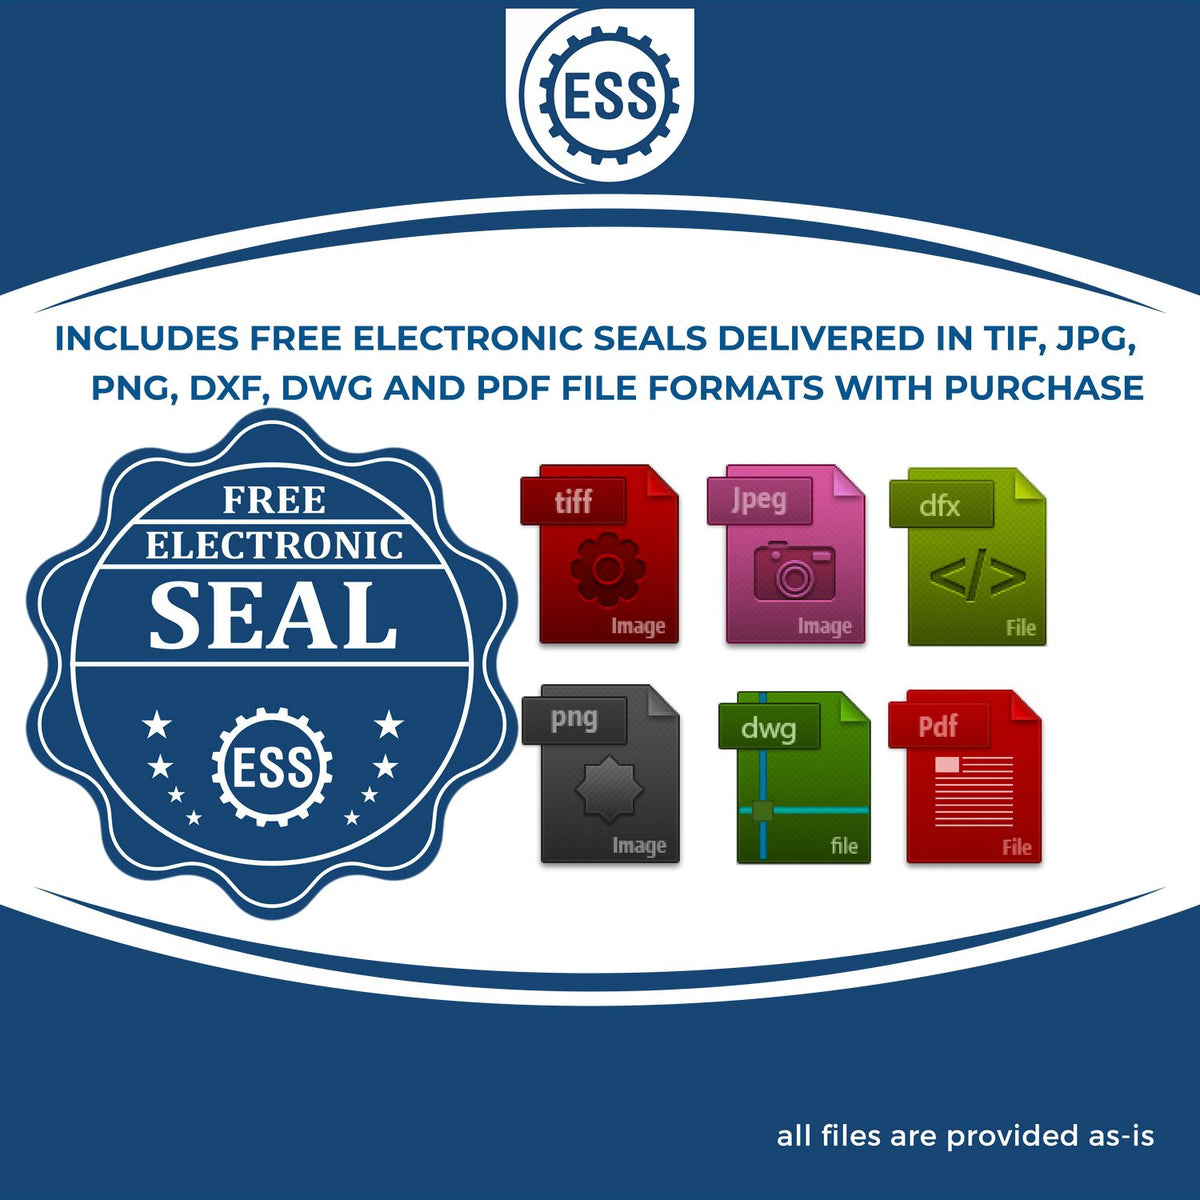 An infographic for the free electronic seal for the Handheld Minnesota Land Surveyor Seal illustrating the different file type icons such as DXF, DWG, TIF, JPG and PNG.